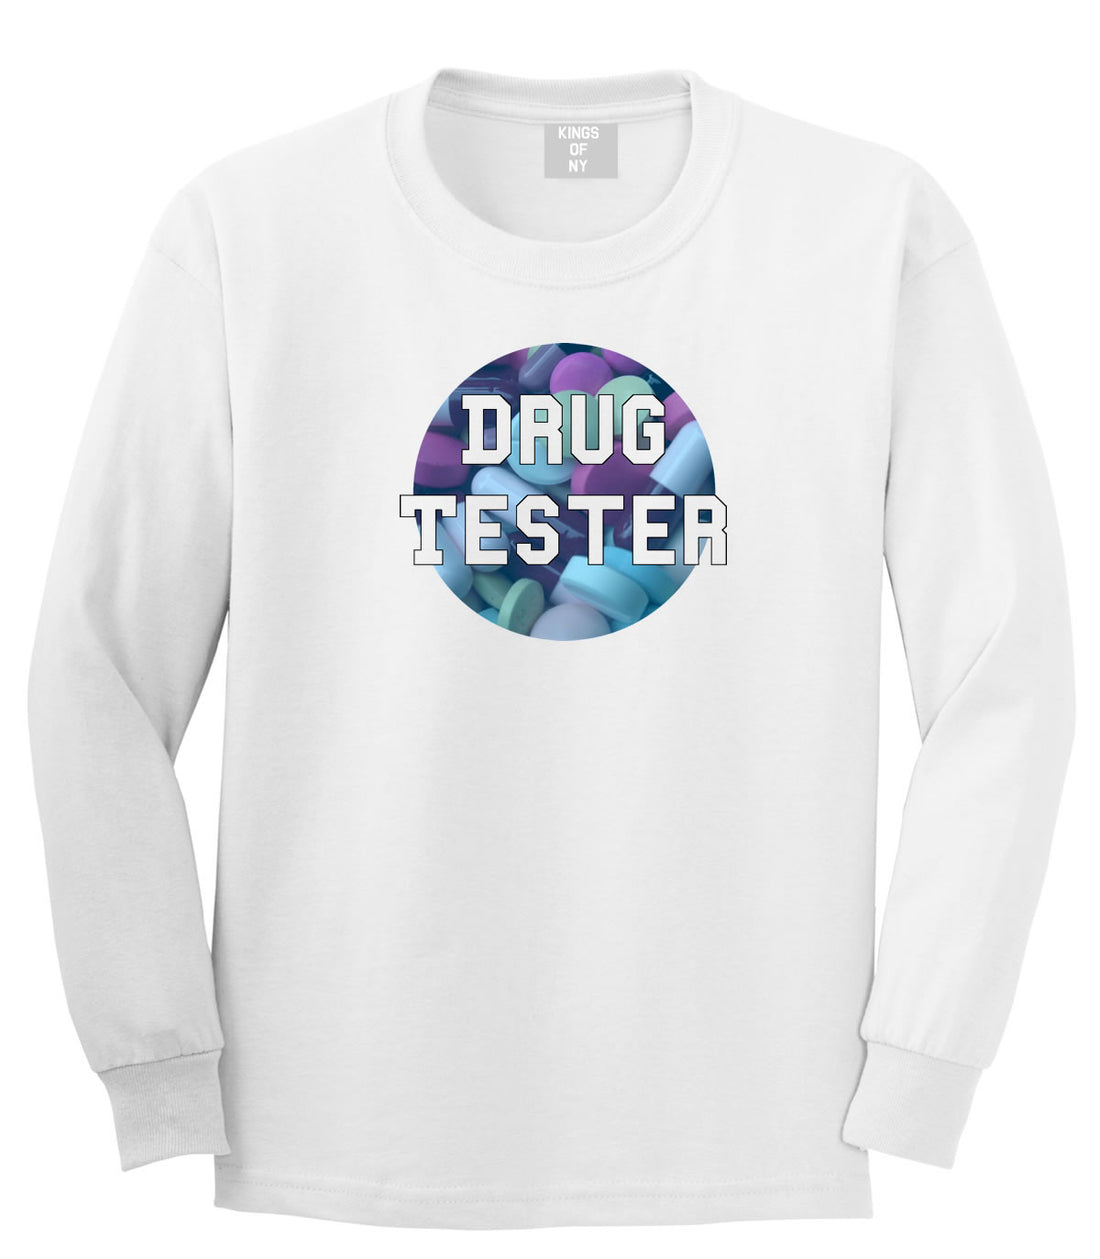 Drug tester weed smoking funny college Long Sleeve T-Shirt in White by Kings Of NY